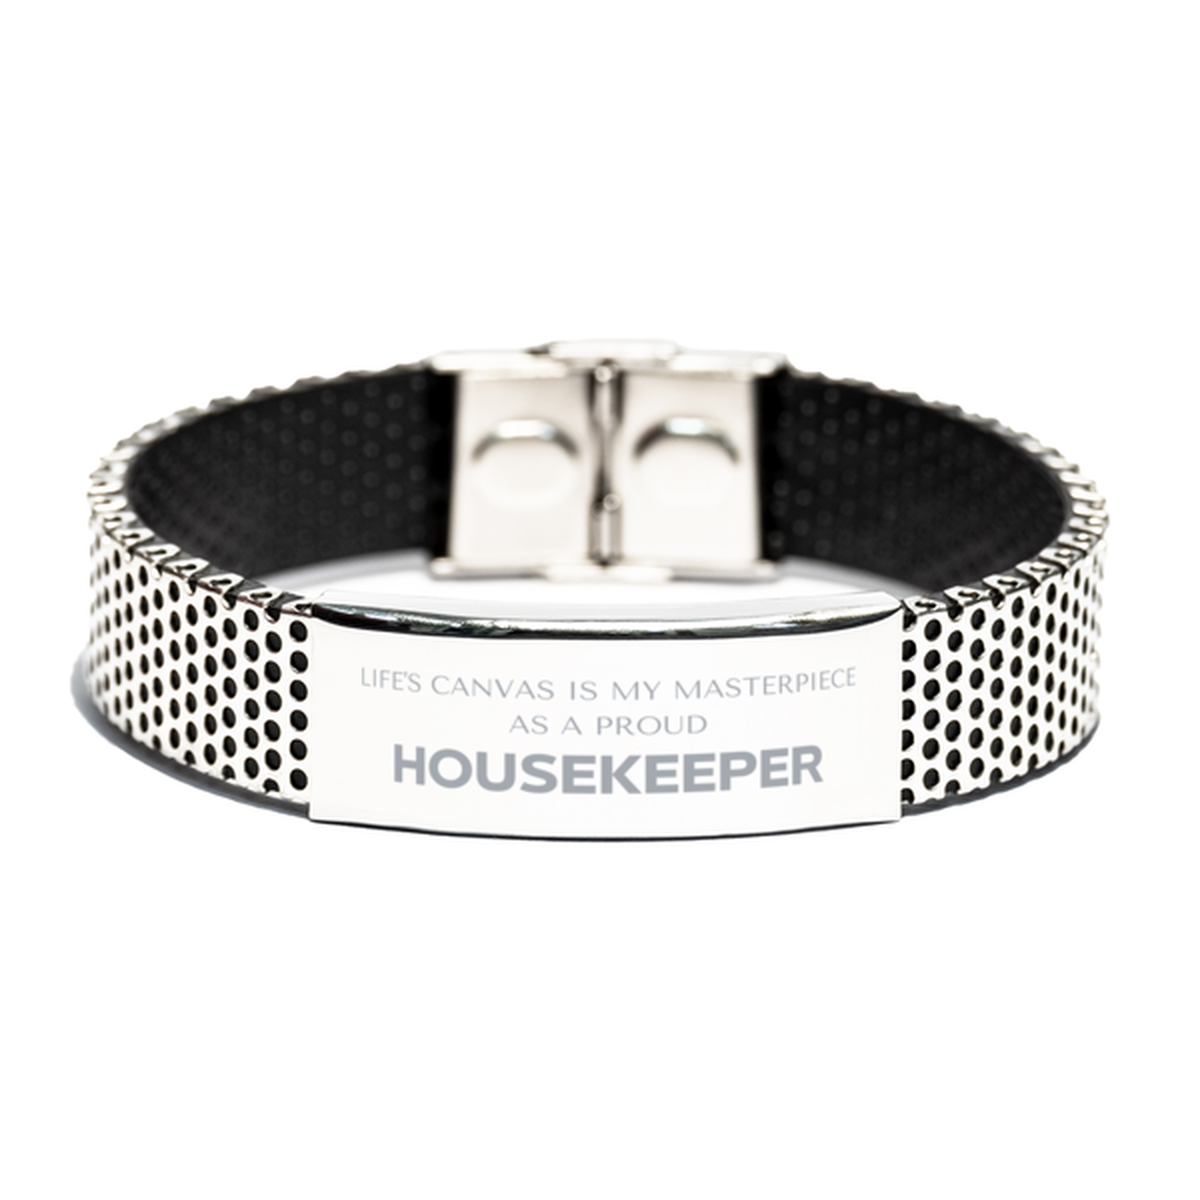 Proud Housekeeper Gifts, Life's canvas is my masterpiece, Epic Birthday Christmas Unique Stainless Steel Bracelet For Housekeeper, Coworkers, Men, Women, Friends